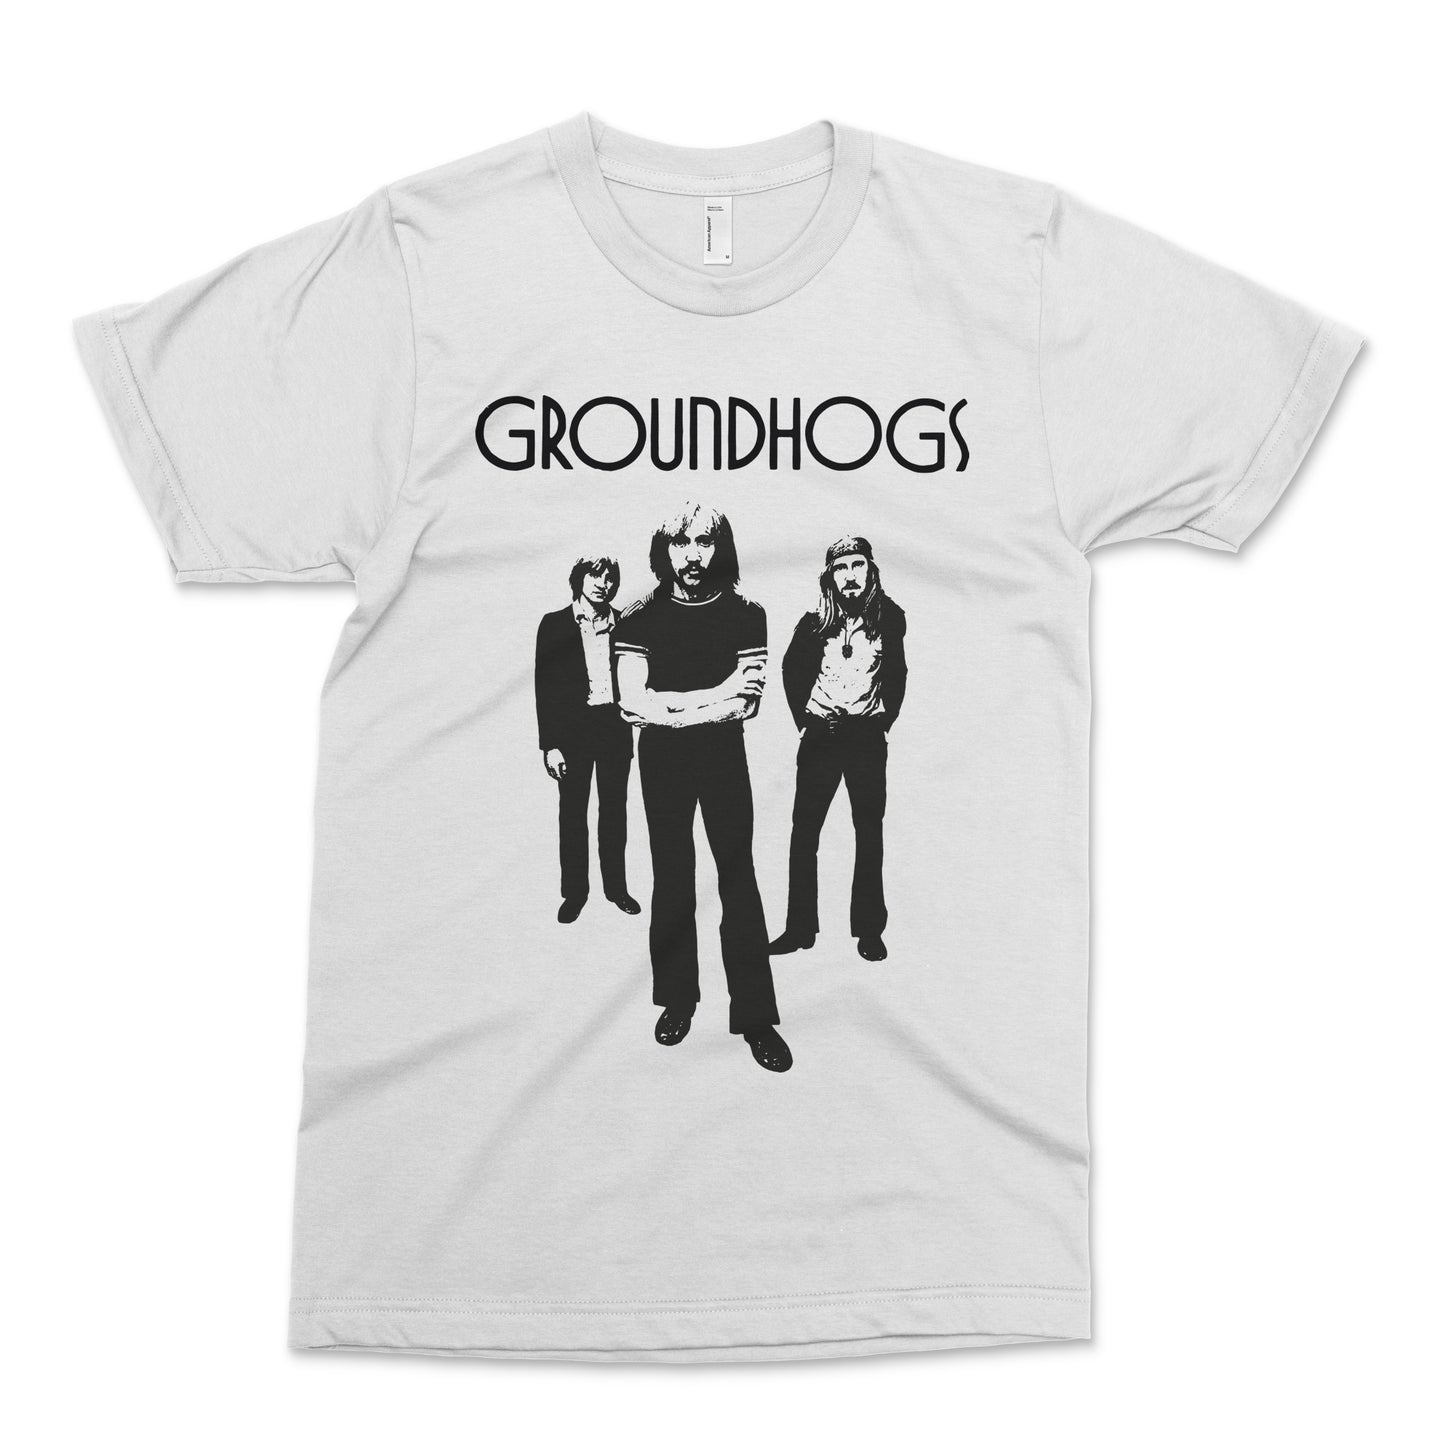 Groundhogs - Split - Double Sided White T Shirt